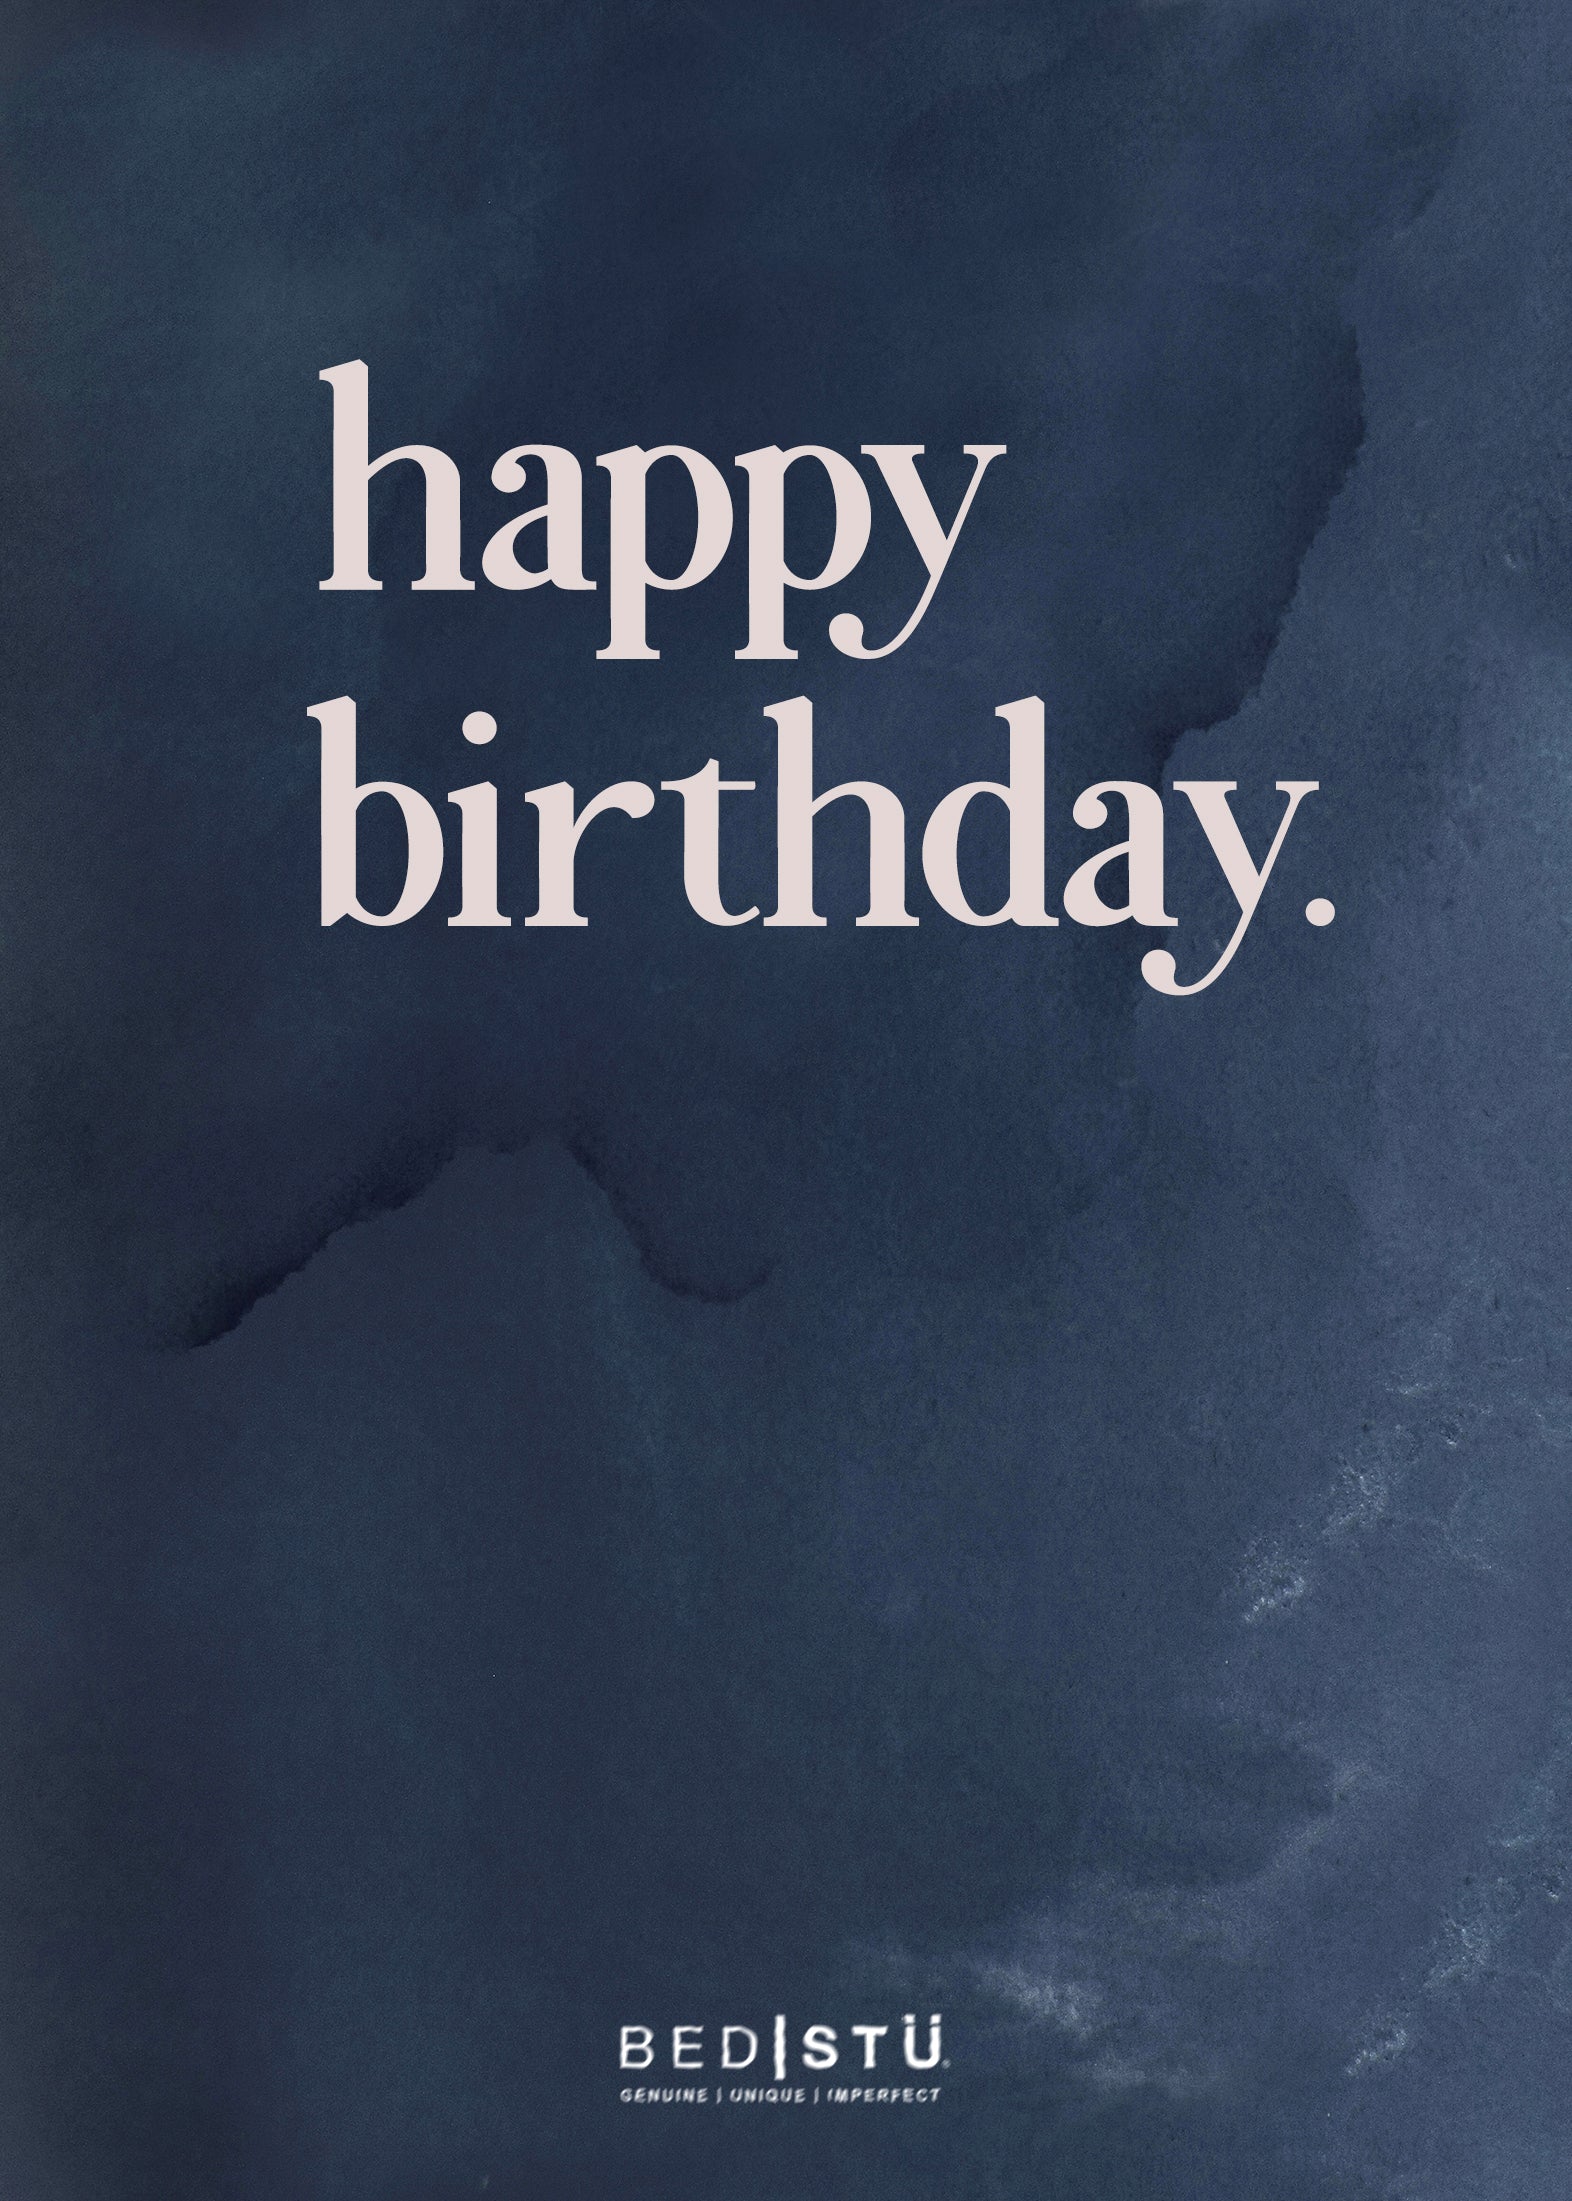 A Bed|Stü Happy Birthday eGift card with the words happy birthday.